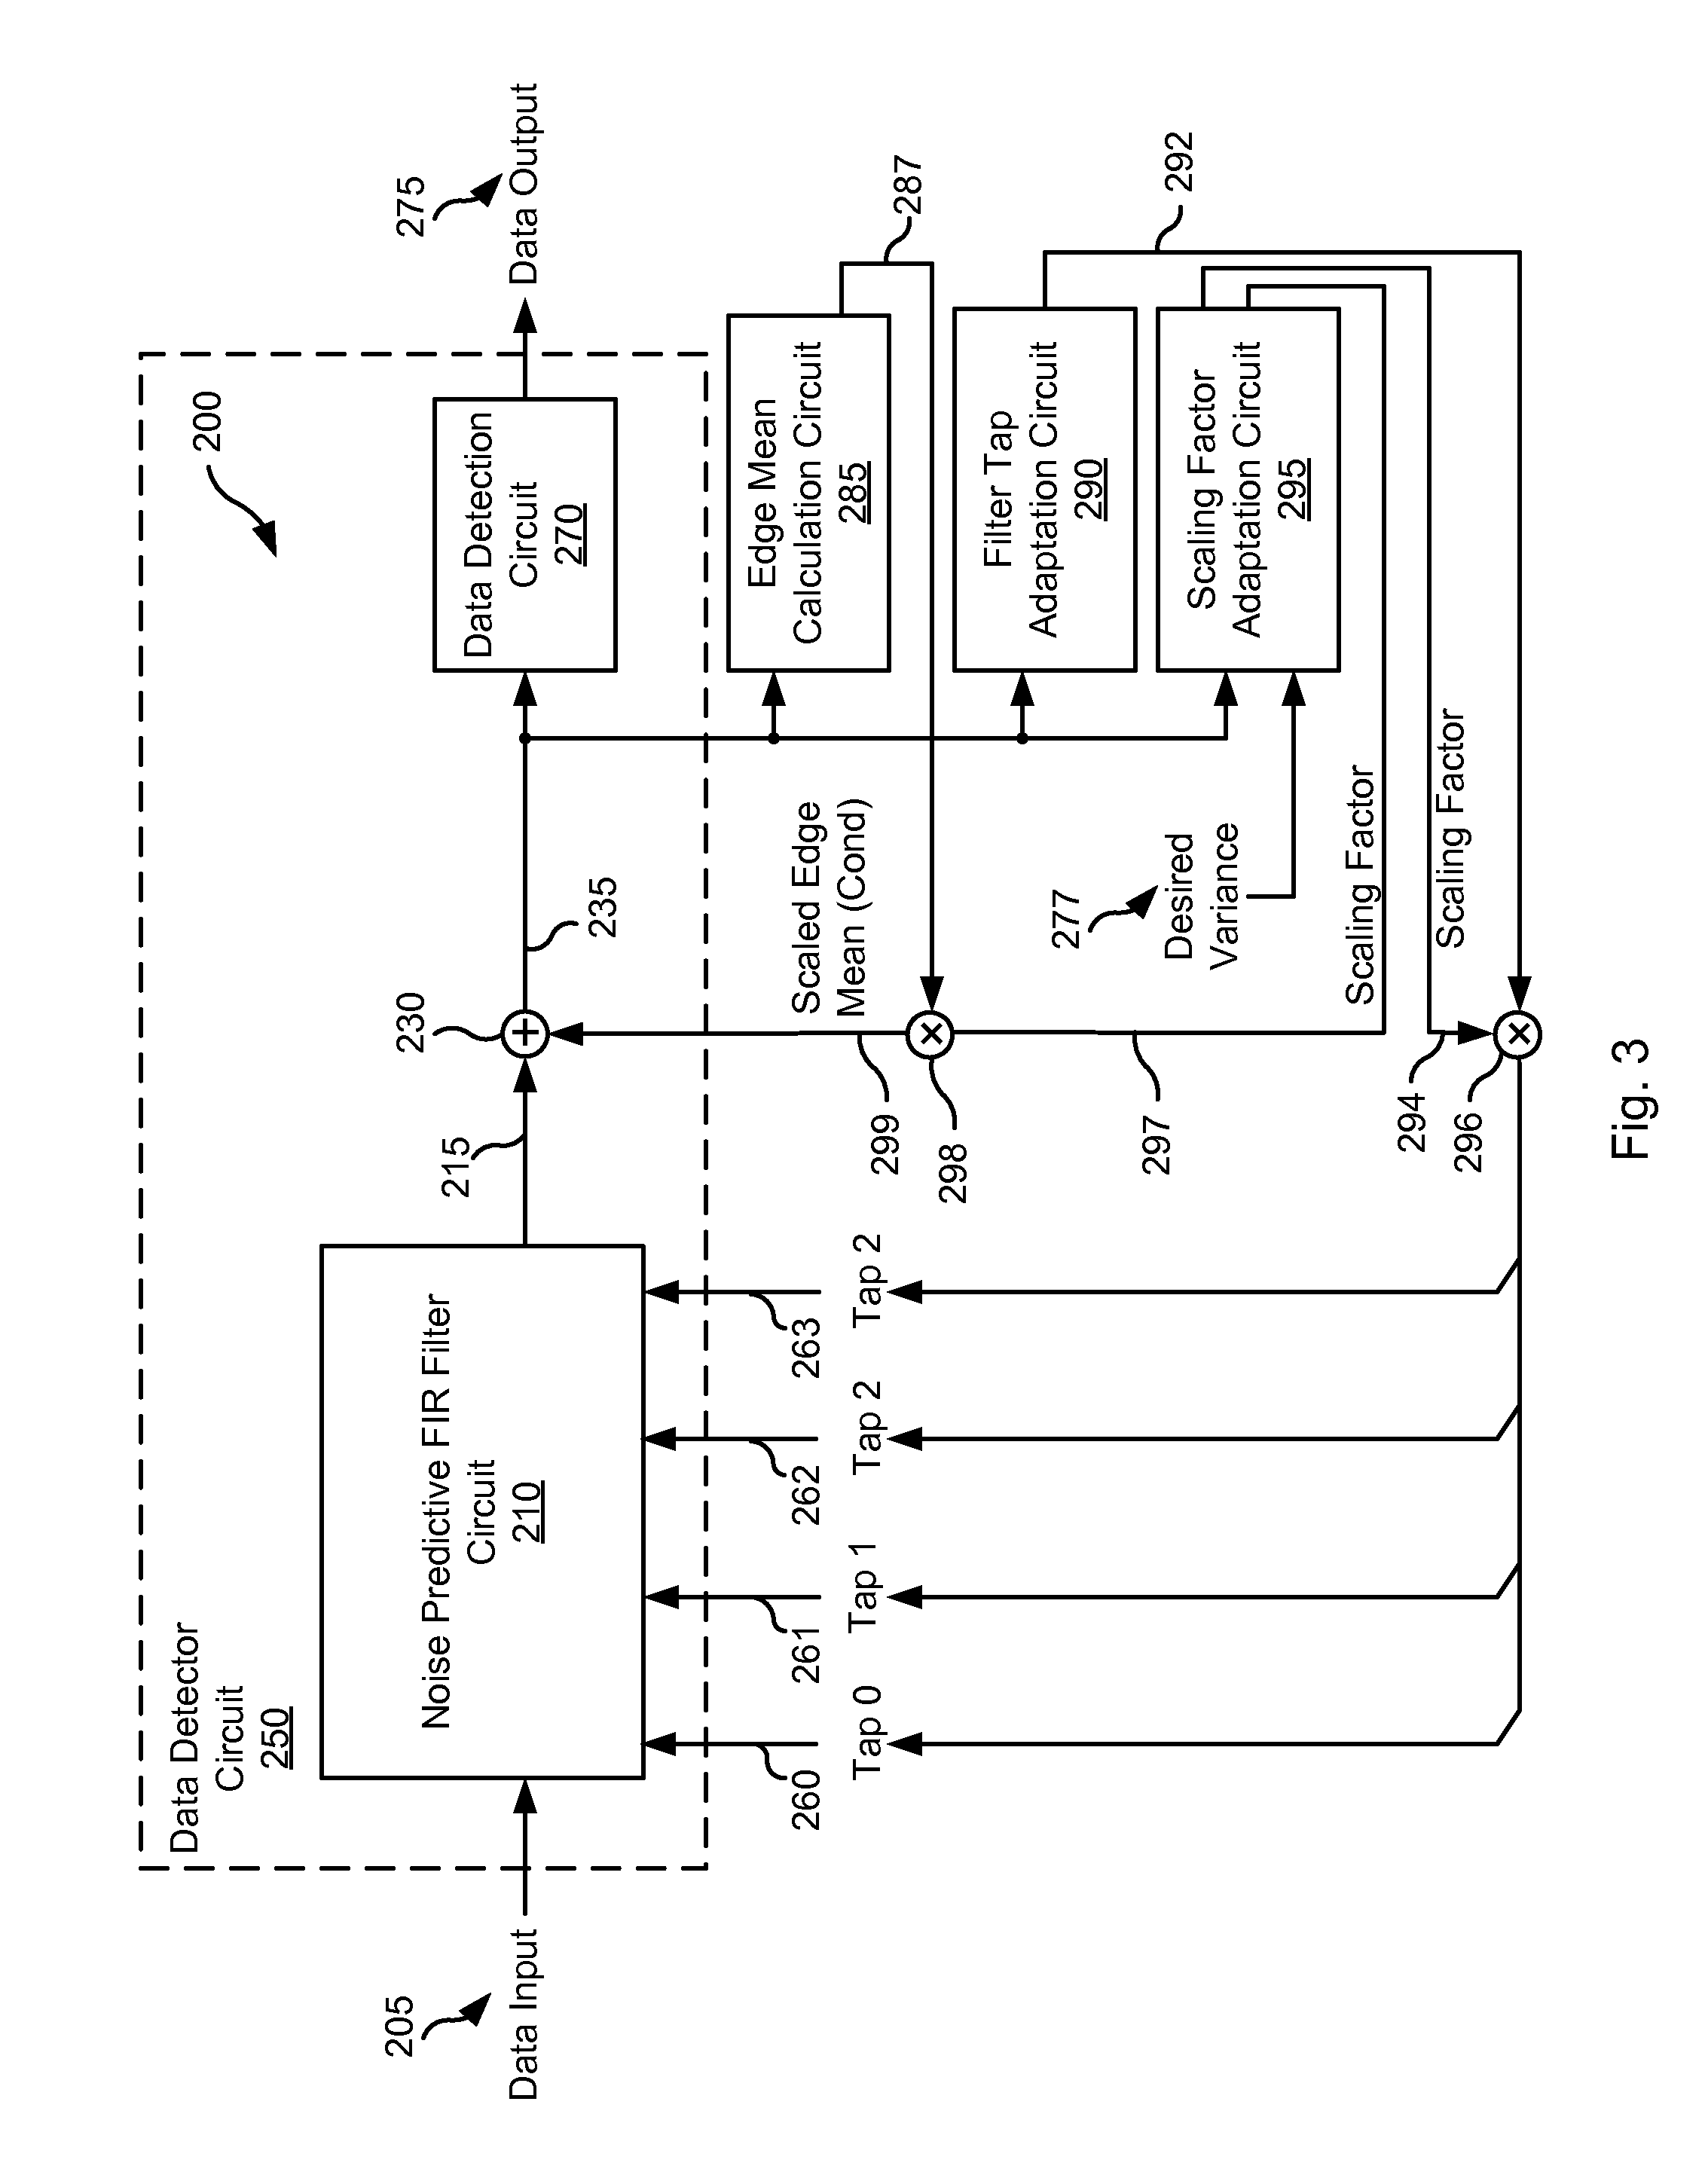 Systems and Methods for Variance Dependent Normalization for Branch Metric Calculation